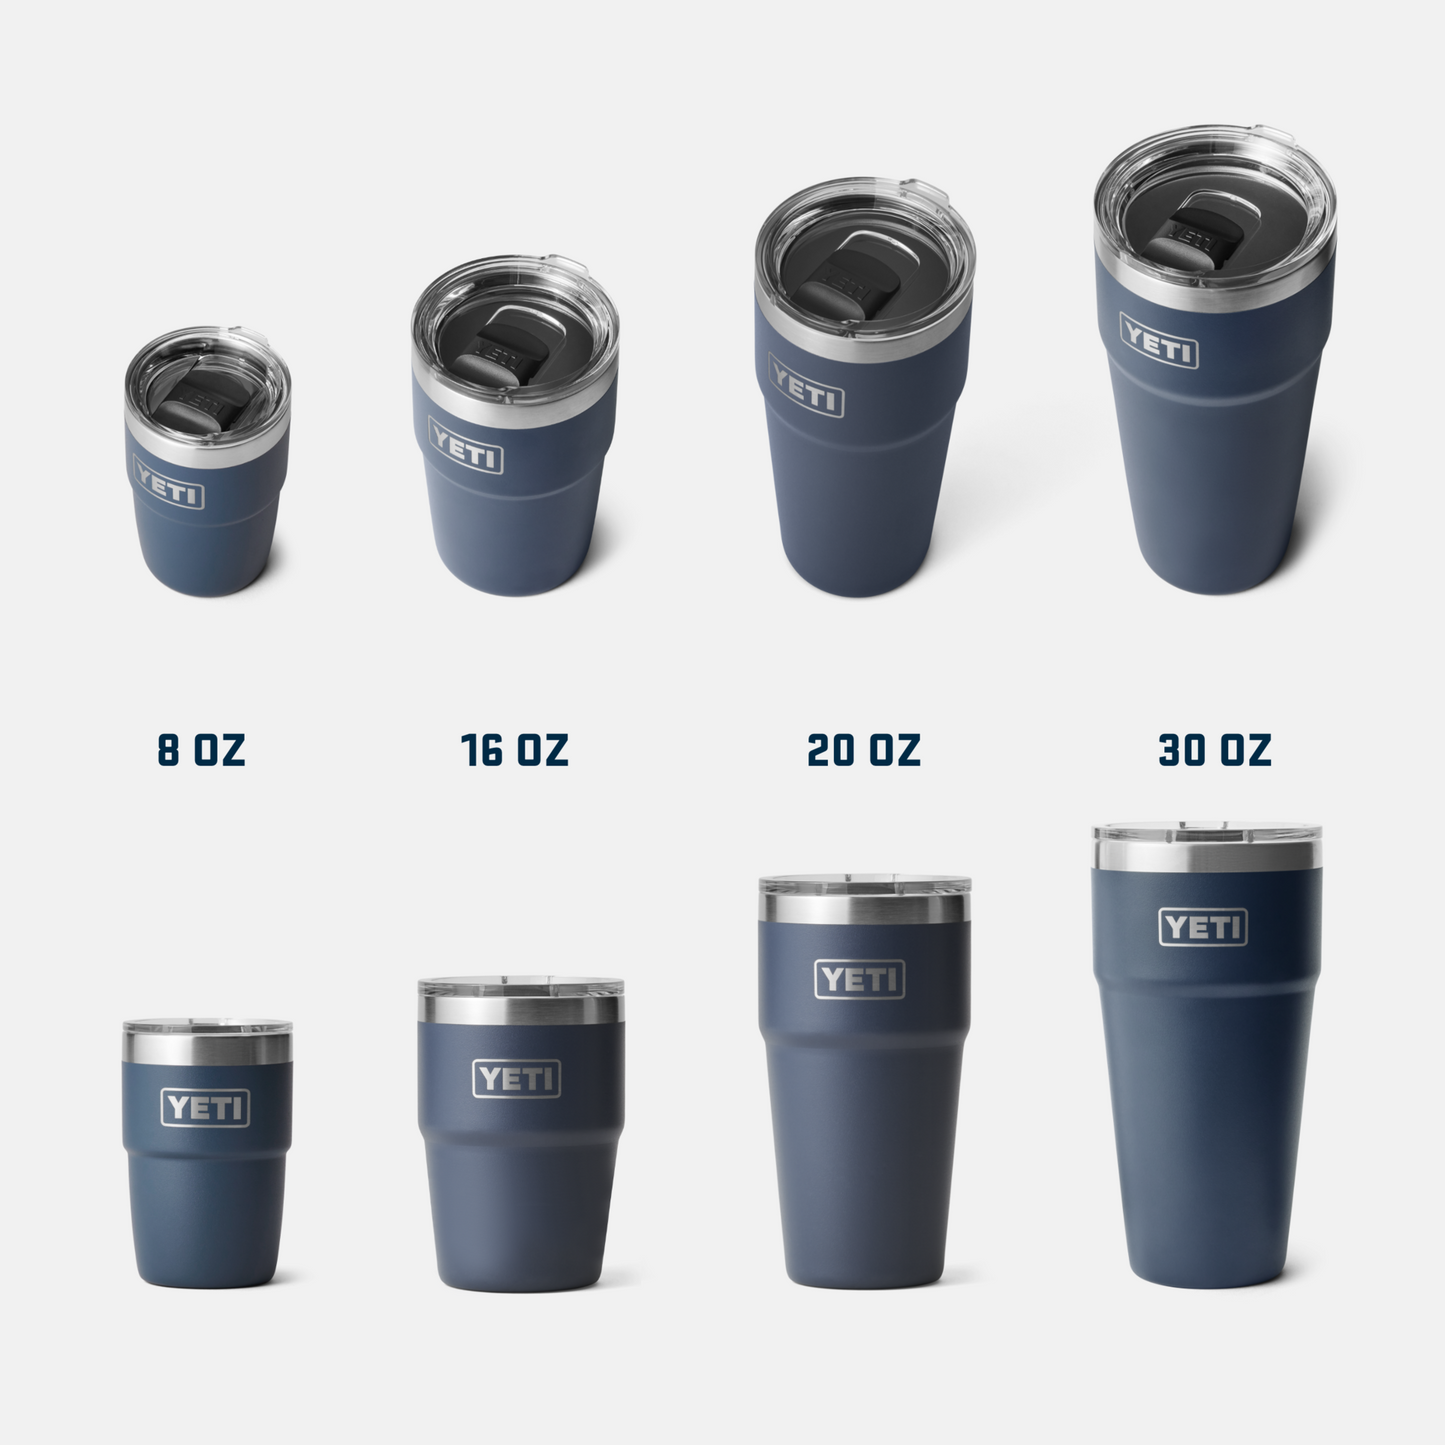 YETI Rambler® 30 oz (887 ml) Stackable Cup Agave Teal